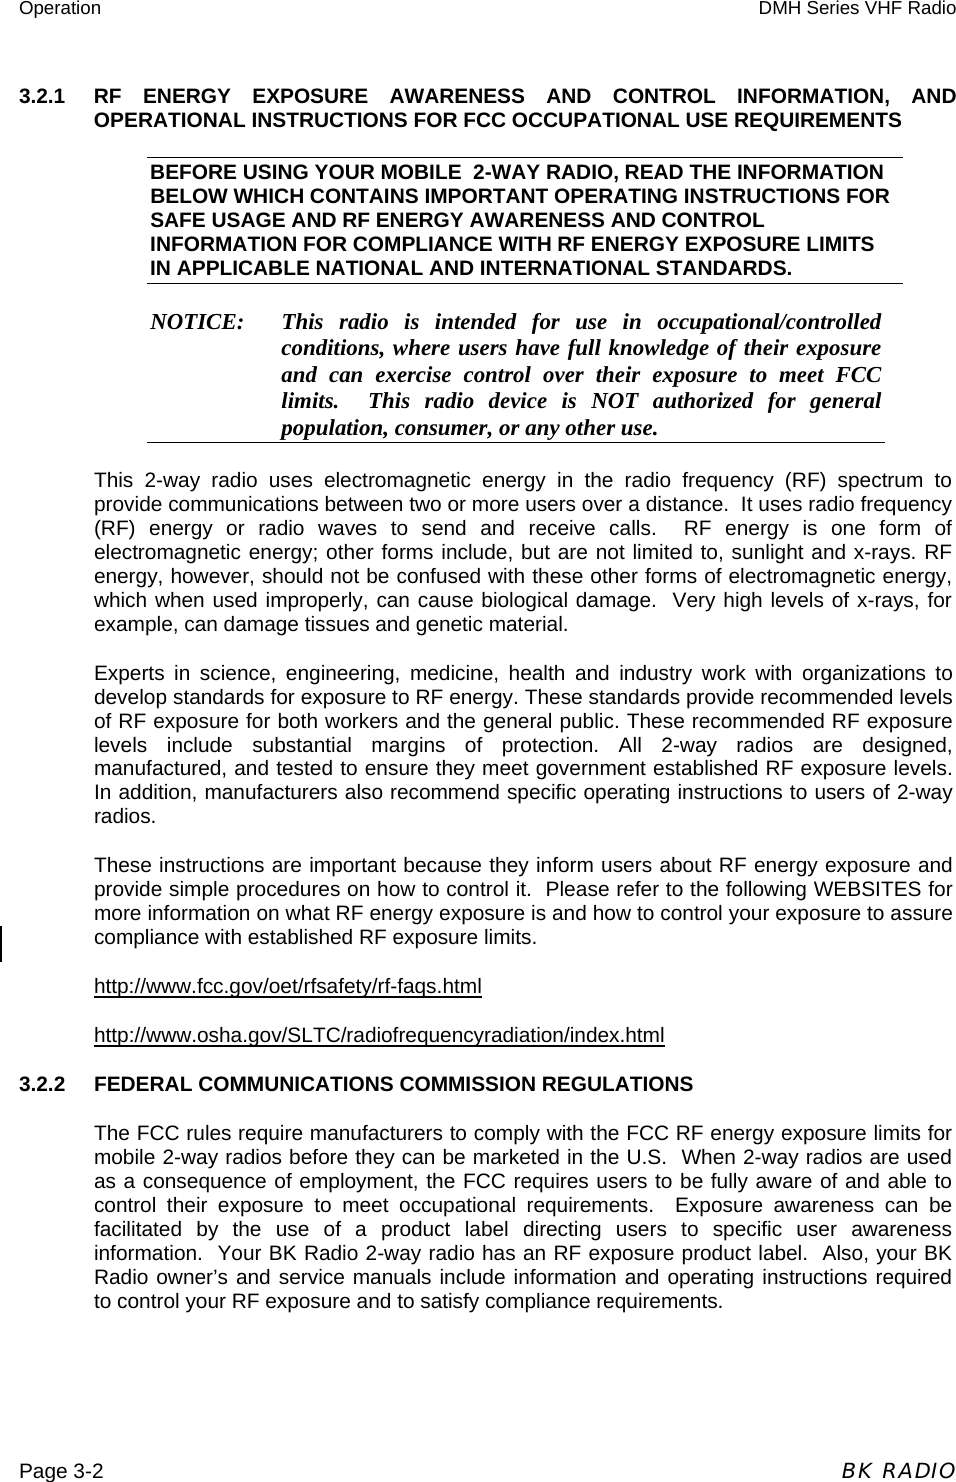 Operation  DMH Series VHF Radio  Page 3-2  BK RADIO 3.2.1  RF ENERGY EXPOSURE AWARENESS AND CONTROL INFORMATION, AND OPERATIONAL INSTRUCTIONS FOR FCC OCCUPATIONAL USE REQUIREMENTS BEFORE USING YOUR MOBILE  2-WAY RADIO, READ THE INFORMATION BELOW WHICH CONTAINS IMPORTANT OPERATING INSTRUCTIONS FOR SAFE USAGE AND RF ENERGY AWARENESS AND CONTROL INFORMATION FOR COMPLIANCE WITH RF ENERGY EXPOSURE LIMITS IN APPLICABLE NATIONAL AND INTERNATIONAL STANDARDS. NOTICE:   This radio is intended for use in occupational/controlled conditions, where users have full knowledge of their exposure and can exercise control over their exposure to meet FCC limits.  This radio device is NOT authorized for general population, consumer, or any other use. This 2-way radio uses electromagnetic energy in the radio frequency (RF) spectrum to provide communications between two or more users over a distance.  It uses radio frequency (RF) energy or radio waves to send and receive calls.  RF energy is one form of electromagnetic energy; other forms include, but are not limited to, sunlight and x-rays. RF energy, however, should not be confused with these other forms of electromagnetic energy, which when used improperly, can cause biological damage.  Very high levels of x-rays, for example, can damage tissues and genetic material.  Experts in science, engineering, medicine, health and industry work with organizations to develop standards for exposure to RF energy. These standards provide recommended levels of RF exposure for both workers and the general public. These recommended RF exposure levels include substantial margins of protection. All 2-way radios are designed, manufactured, and tested to ensure they meet government established RF exposure levels. In addition, manufacturers also recommend specific operating instructions to users of 2-way radios. These instructions are important because they inform users about RF energy exposure and provide simple procedures on how to control it.  Please refer to the following WEBSITES for more information on what RF energy exposure is and how to control your exposure to assure compliance with established RF exposure limits. http://www.fcc.gov/oet/rfsafety/rf-faqs.html  http://www.osha.gov/SLTC/radiofrequencyradiation/index.html 3.2.2  FEDERAL COMMUNICATIONS COMMISSION REGULATIONS The FCC rules require manufacturers to comply with the FCC RF energy exposure limits for mobile 2-way radios before they can be marketed in the U.S.  When 2-way radios are used as a consequence of employment, the FCC requires users to be fully aware of and able to control their exposure to meet occupational requirements.  Exposure awareness can be facilitated by the use of a product label directing users to specific user awareness information.  Your BK Radio 2-way radio has an RF exposure product label.  Also, your BK Radio owner’s and service manuals include information and operating instructions required to control your RF exposure and to satisfy compliance requirements. 